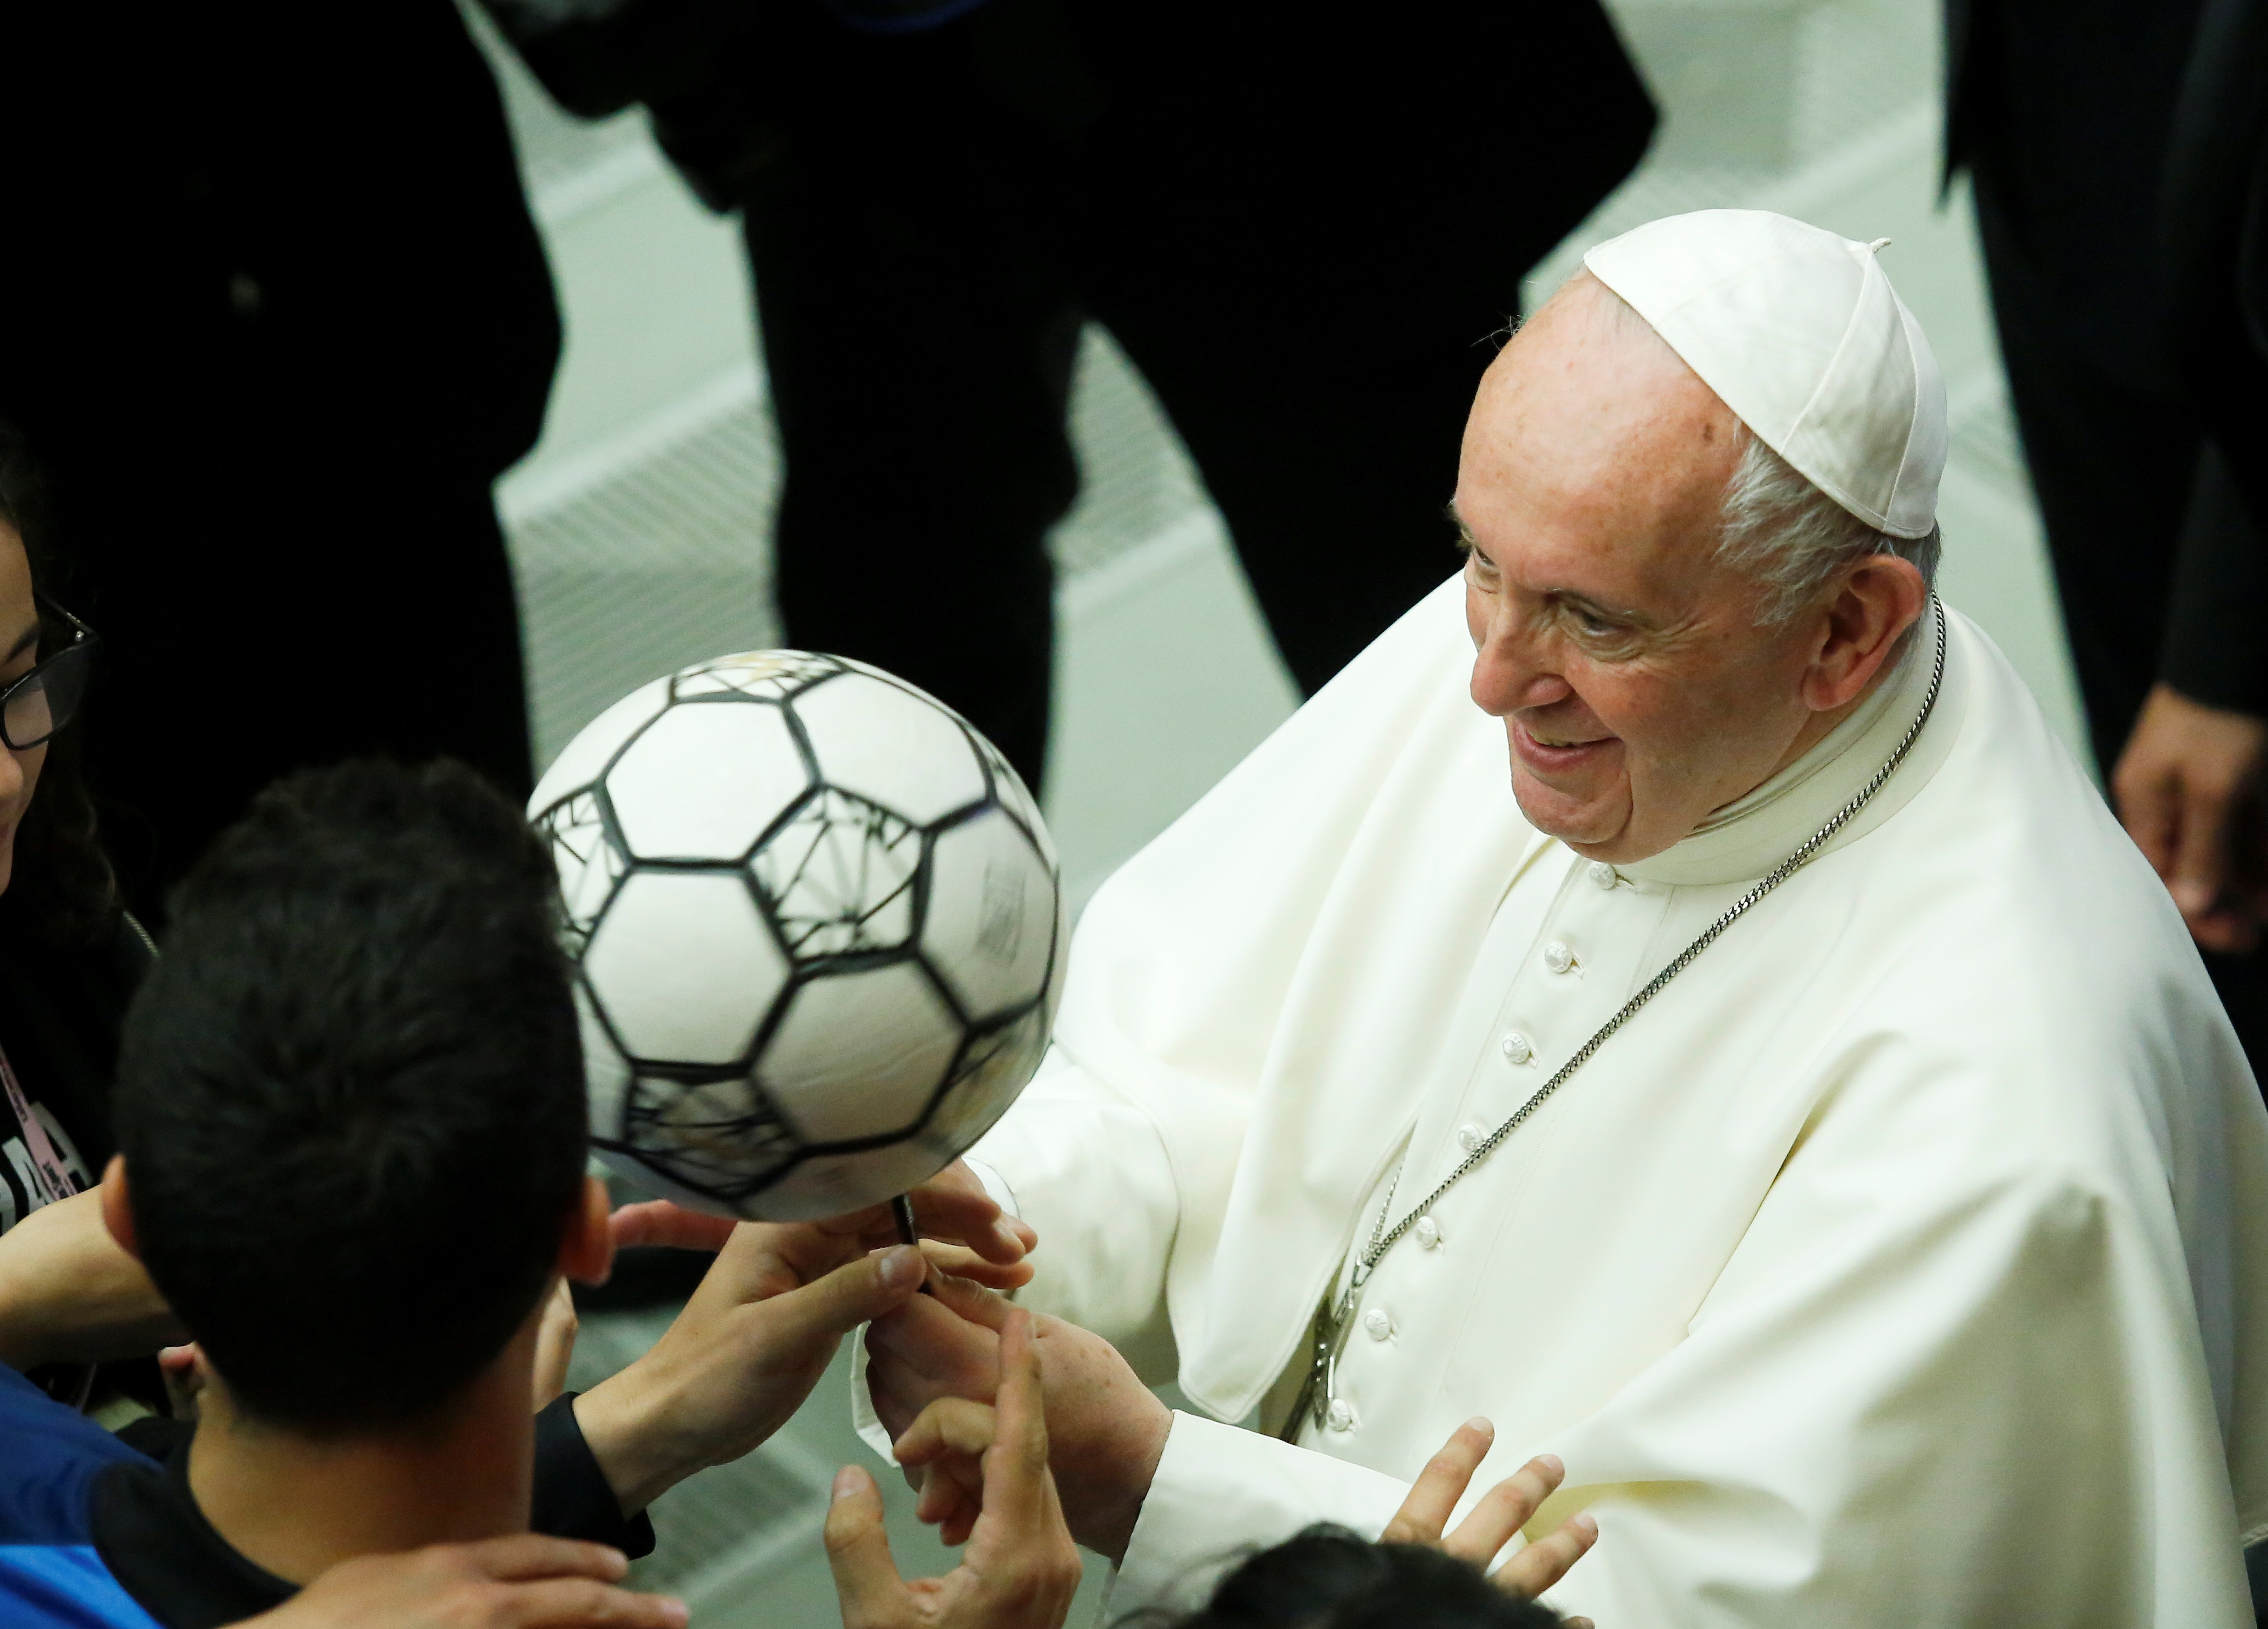 Pope Francis gestures as he participates alongside thousands of young soccer athletes in a project to promote the values of sport and soccer May 24, 2019, at the Vatican. (CNS/RNS/Remo Casilli)